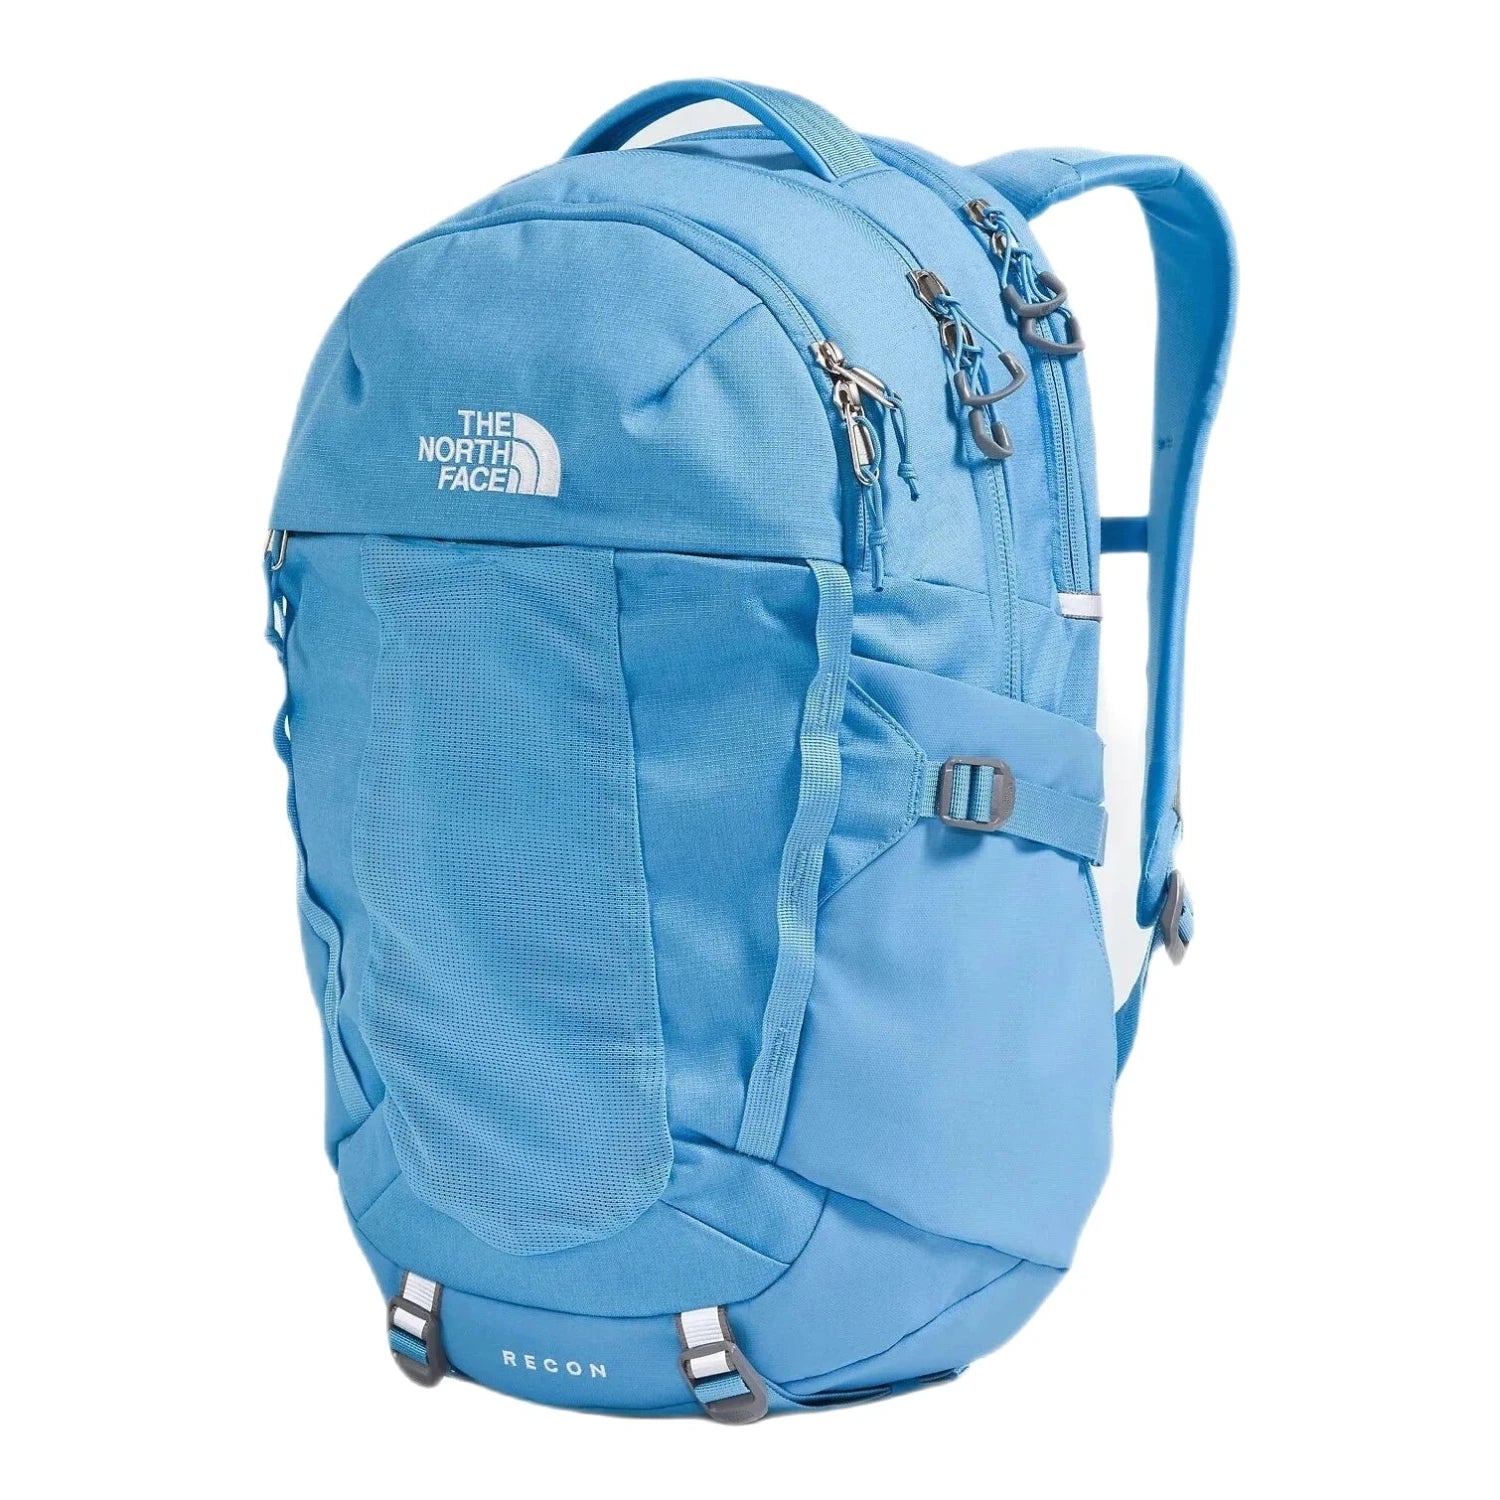 The North Face Women's Recon Backpack Cornflower Heather Front